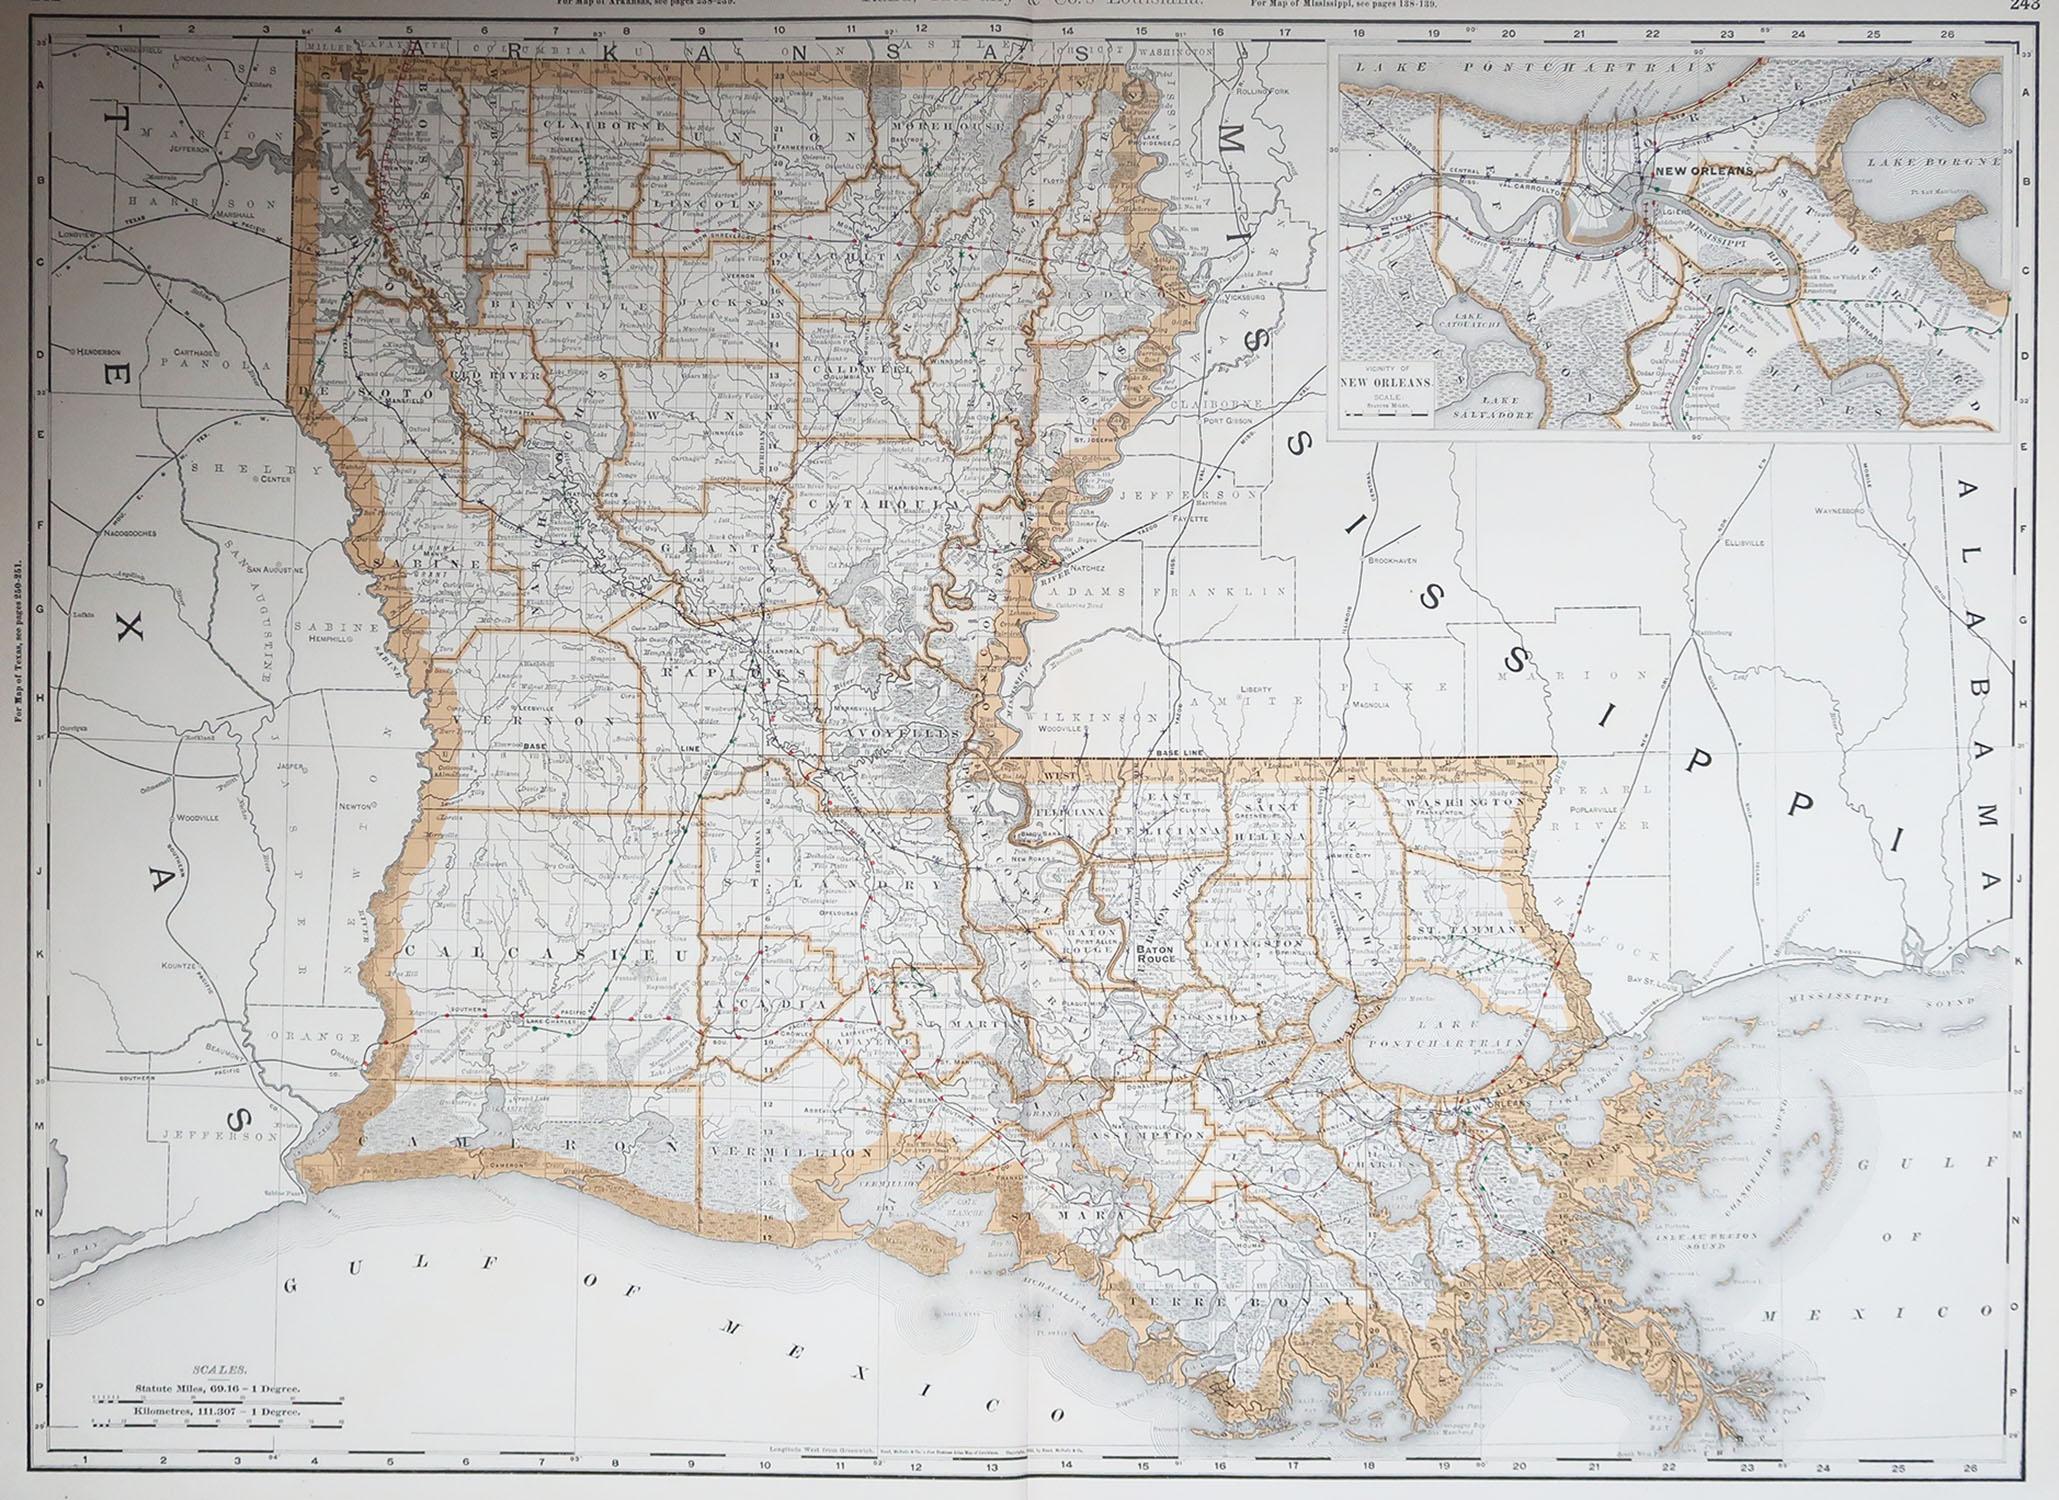 Fabulous map of Louisiana.

Original color.

By Rand, McNally & Co.

Published, 1894.

Unframed.

Free shipping.